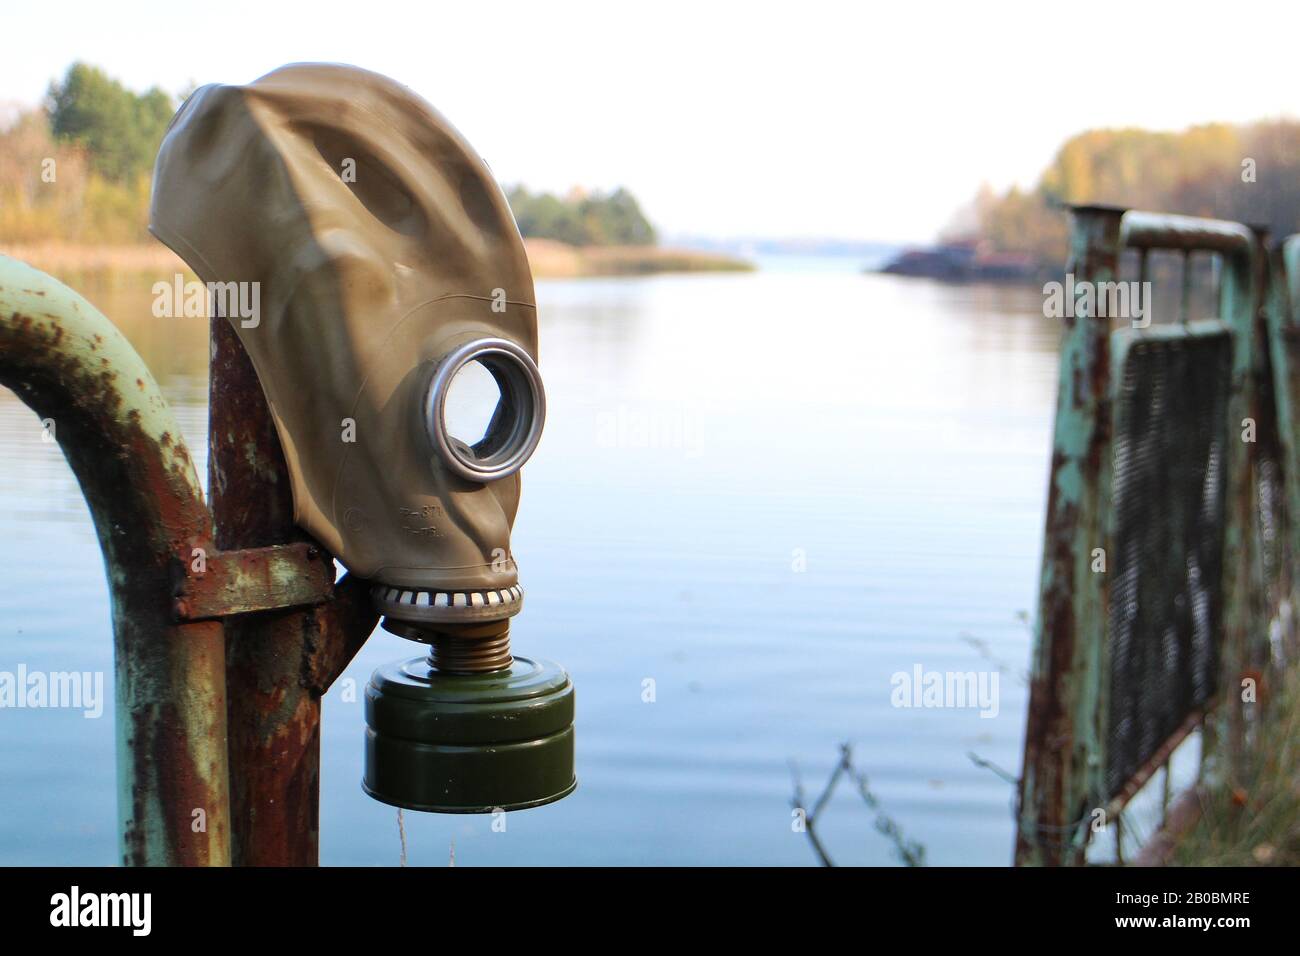 A gas mask is hung up at Pripyat river in Pripyat, Ukraine, site of the Chernobyl nuclear desaster and center of the Chernobyl exclusion zone. Stock Photo